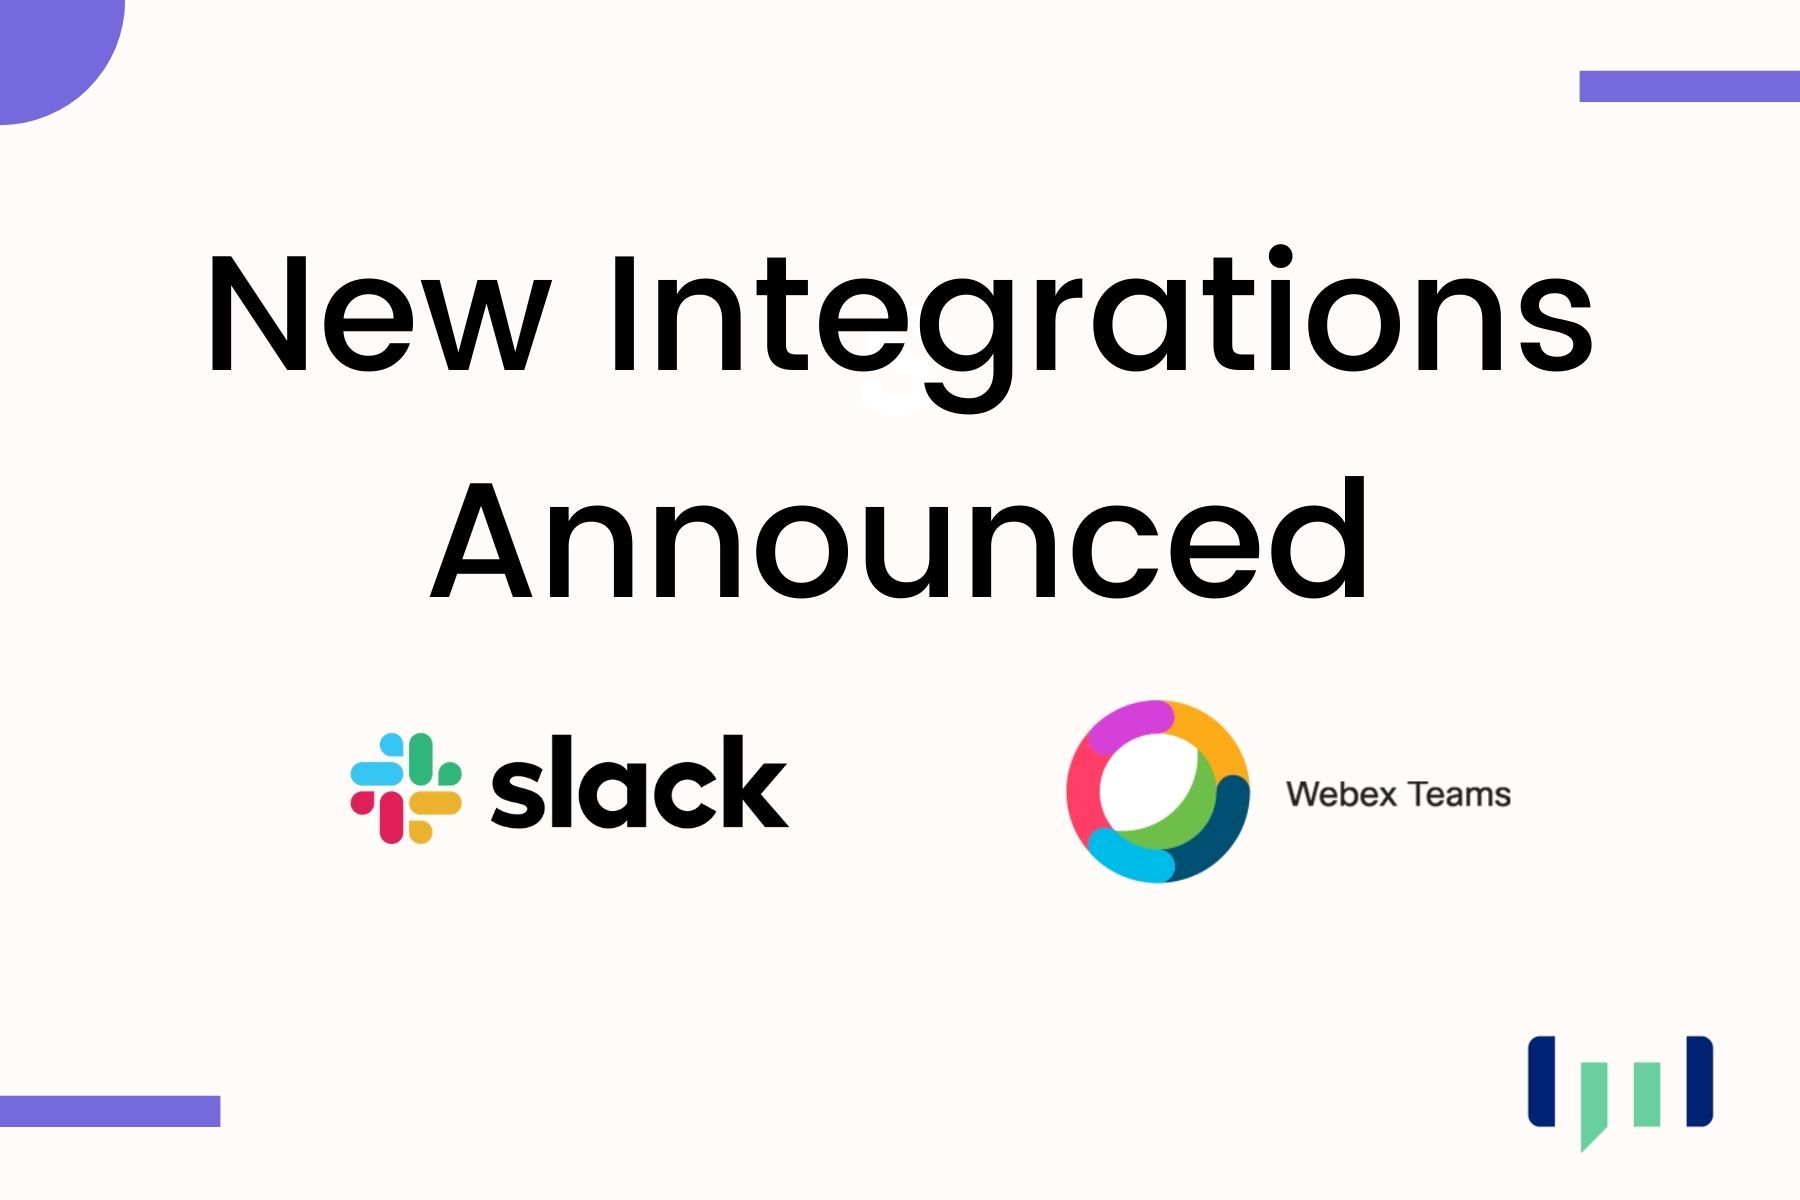 Mobile Coach announces new integrations with Slack and Webex Teams and 3rd Party API support